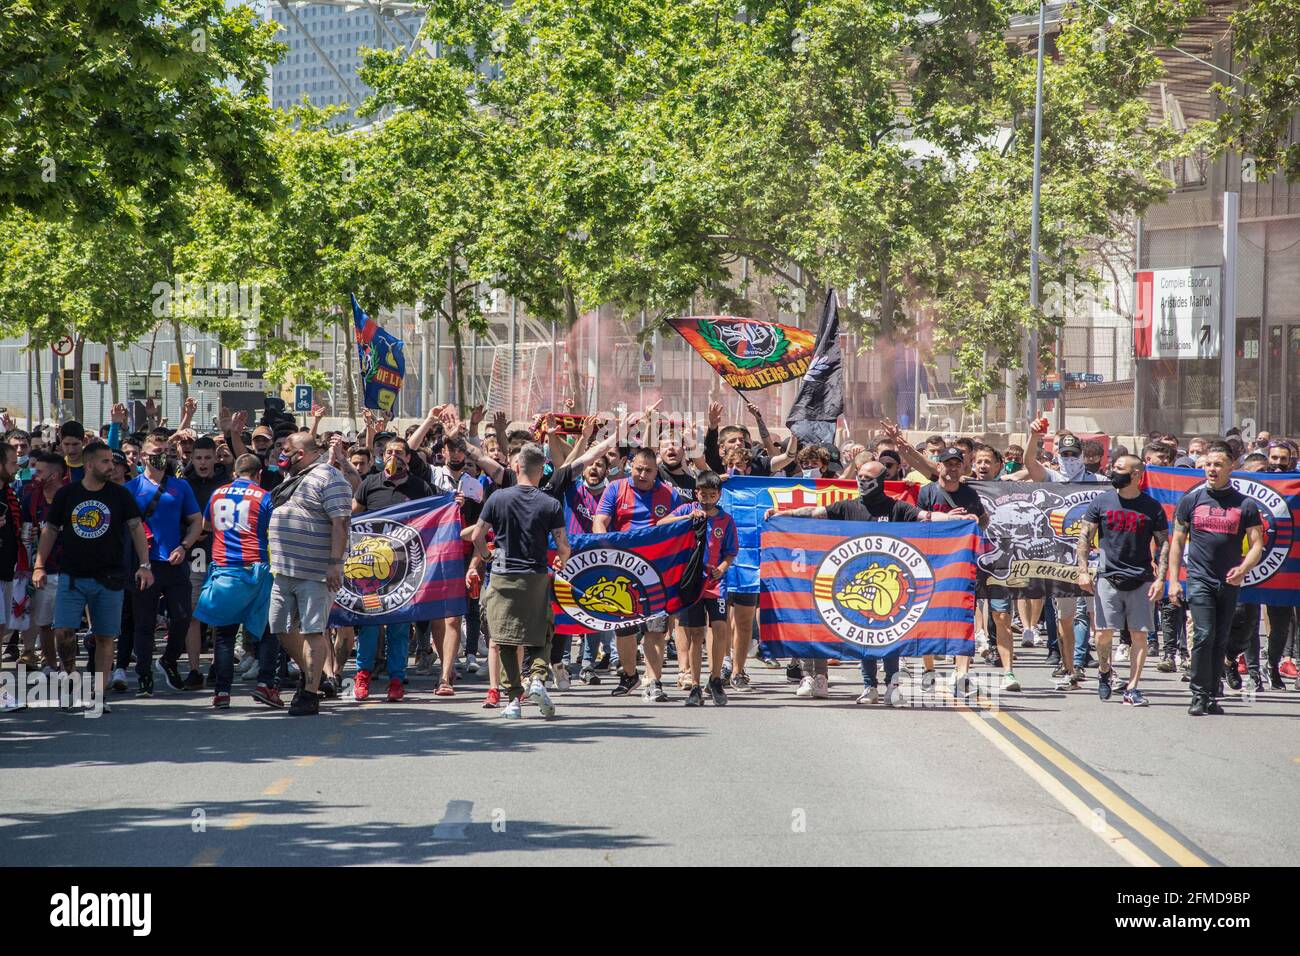 Barcelona, Spain. 08th May, 2021. Soccer Club Barcelona fans hold ultras flags. The ultras supporter group of Football Club Barcelona, Boixos Nois (Crazy Boys) have gathered outside the Camp Nou stadium to motivate the team before the match against Club Atletico de Madrid for the 35th round of La Liga, the Spanish football league. Barça's victory will put the team, currently in third place, ahead of Atletico de Madrid, which occupies the first position. Credit: SOPA Images Limited/Alamy Live News Stock Photo